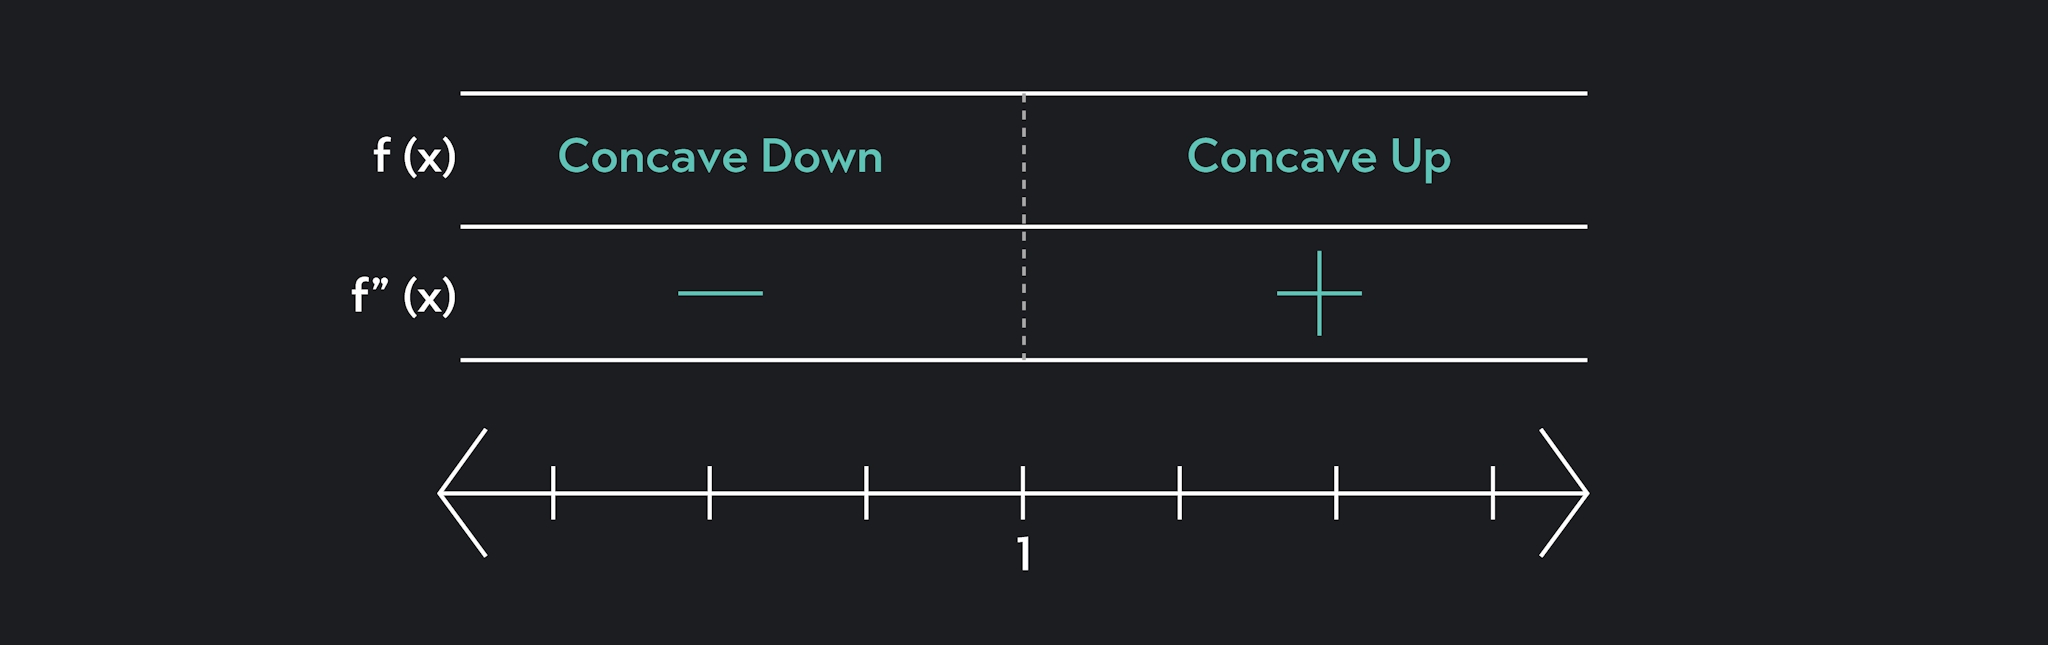 Number line showing concave down, concave up, and 1 = inflection point